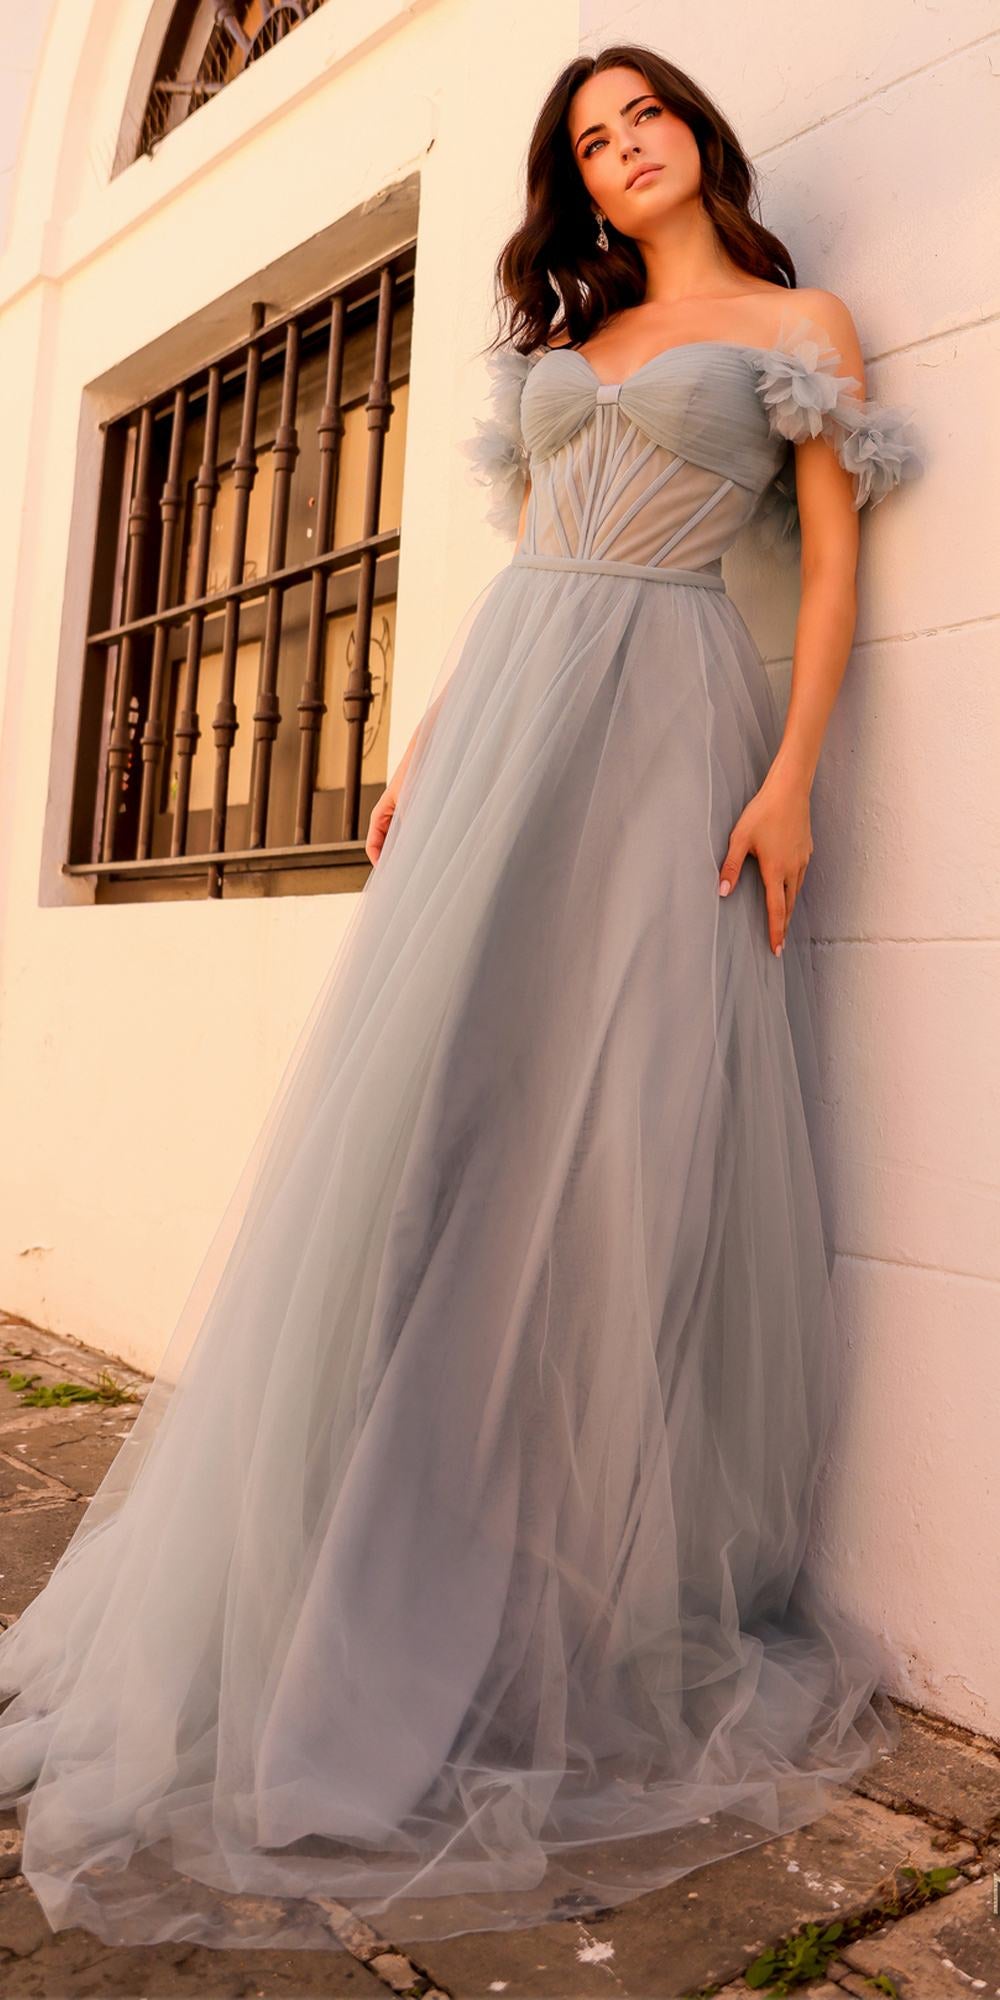 Nox Anabel Y1474 Long Ruffled Off the Shoulder Boned Bodice A-Line Gown